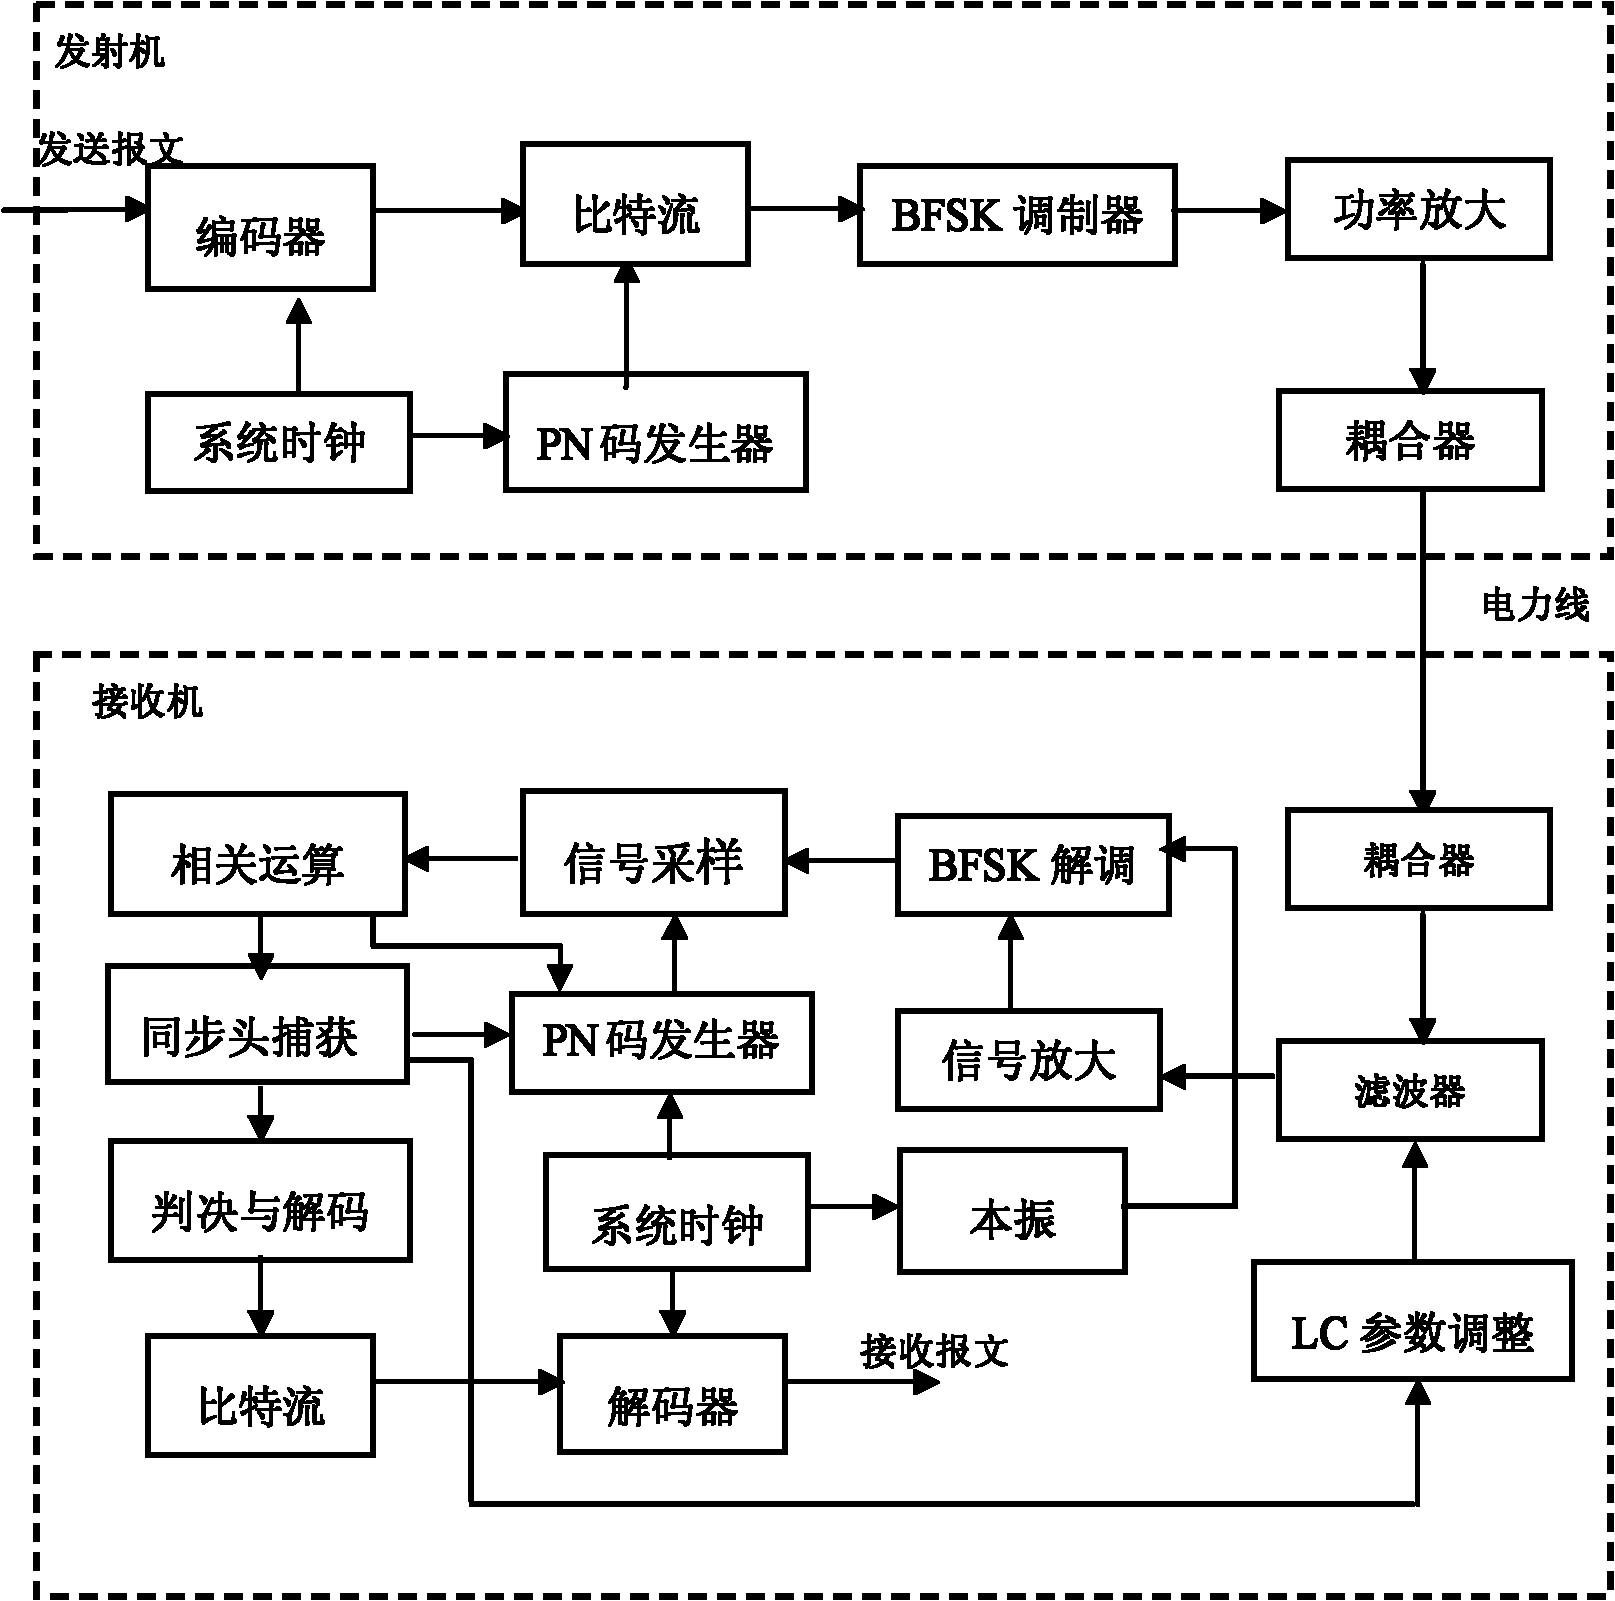 Carrier communication method and system for BFSK (Binary Frequency Shift Keying) spread-spectrum power line